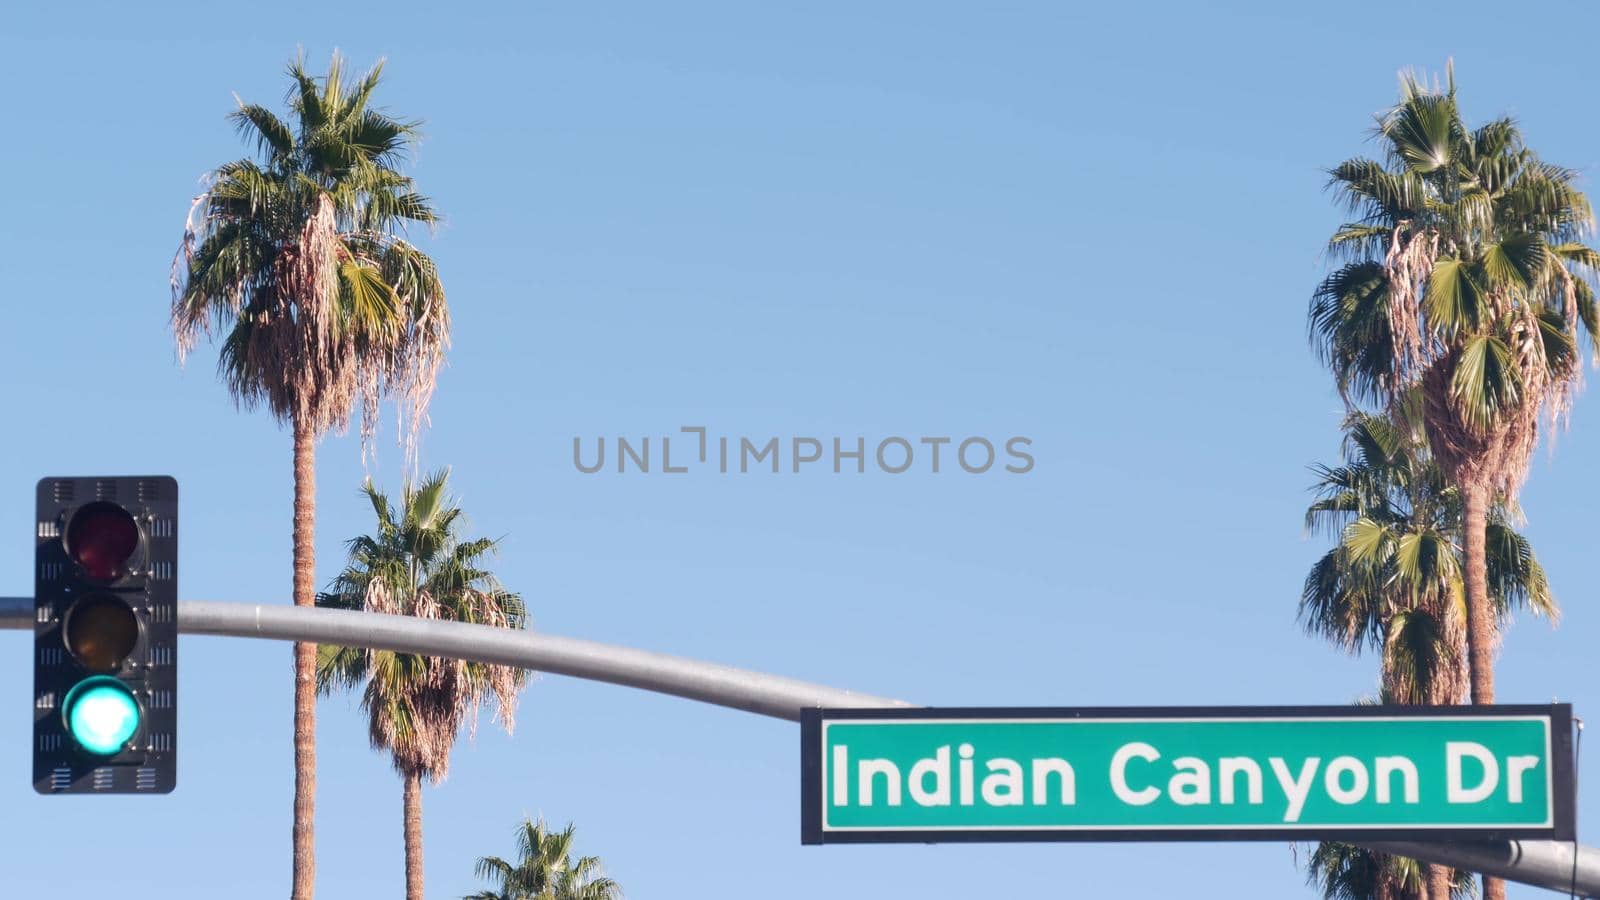 Palm trees and blue sky, Palm Springs resort city near Los Angeles, street road sign, semaphore traffic lights on crossroad. California desert valley summer road trip on car, travel USA. Indian Canyon